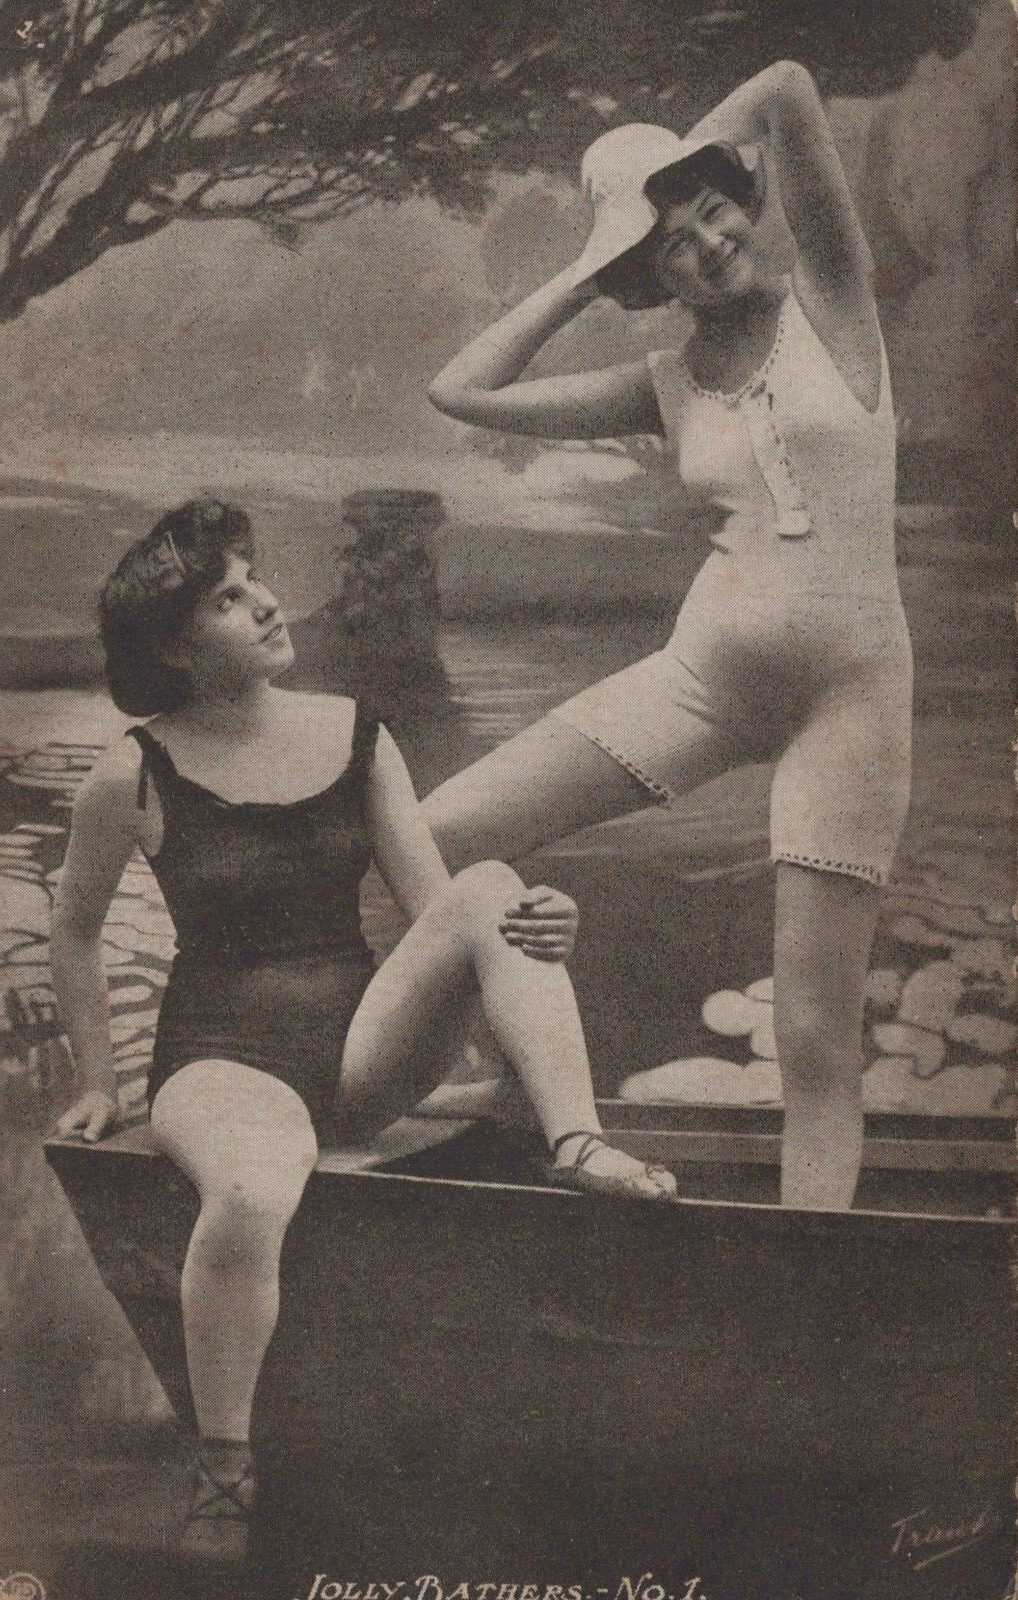 Naughty Victorian Postcard - Jolly Bather -No. 1.  Victorian Women in Swimsuits